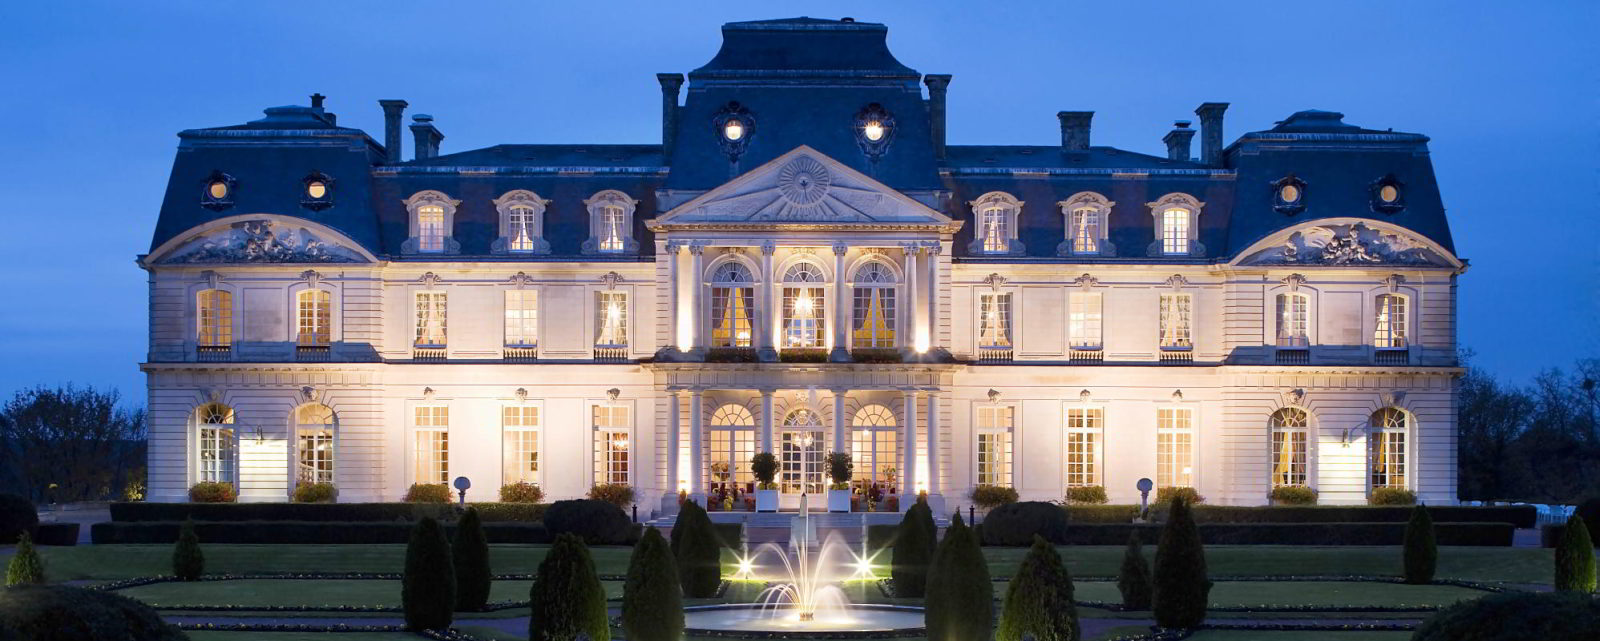 France Loire Valley 5-Star Chateau Hotel picture. Luxury Holidays with In-Luxe Travel France, The specialist of luxury bespoke holidays in France since 2007